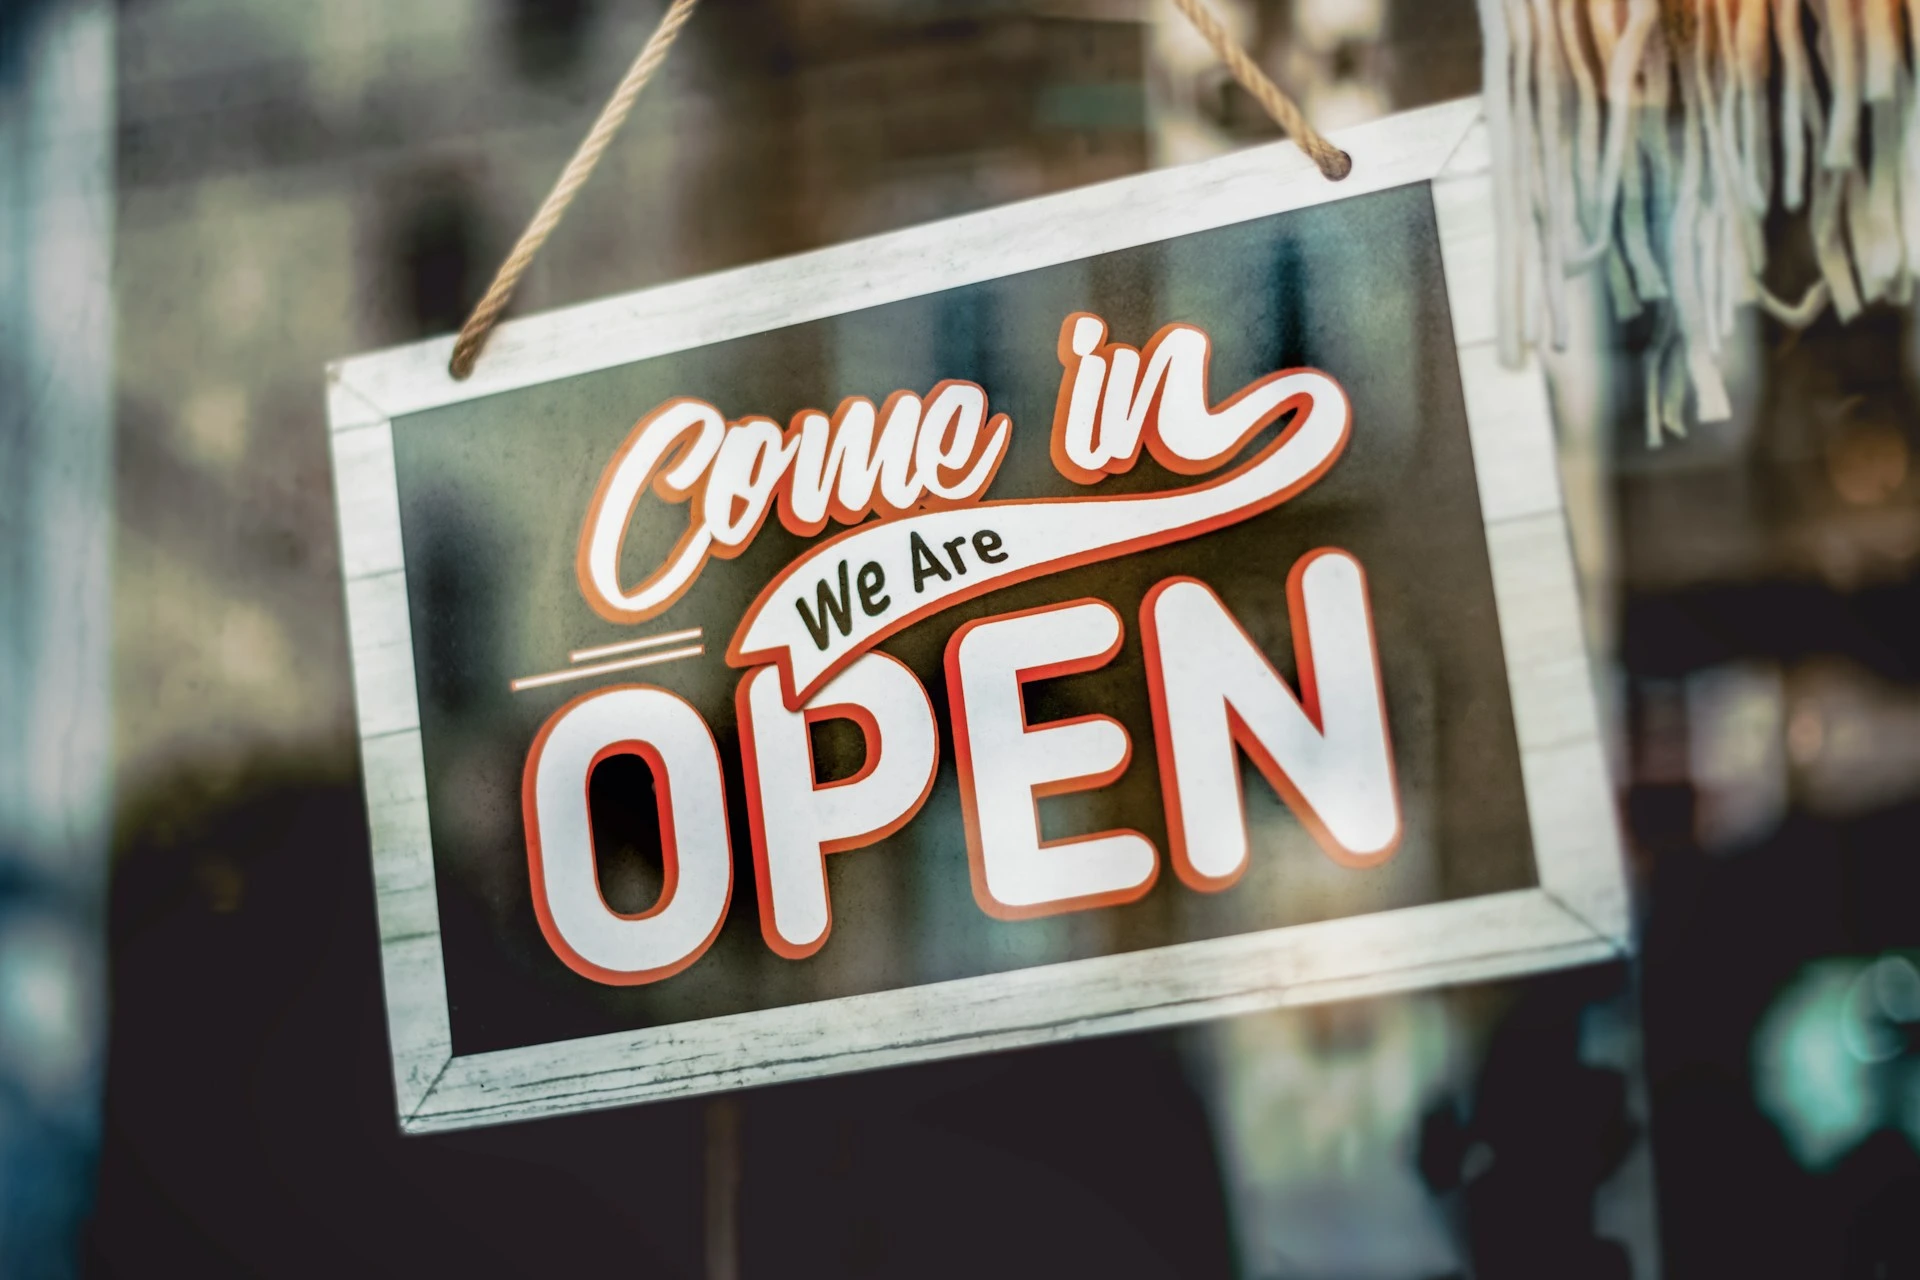 A neon sign in a window reads "come in we are open," hanging from a metal chain with a blurred background, inviting the brand community inside.